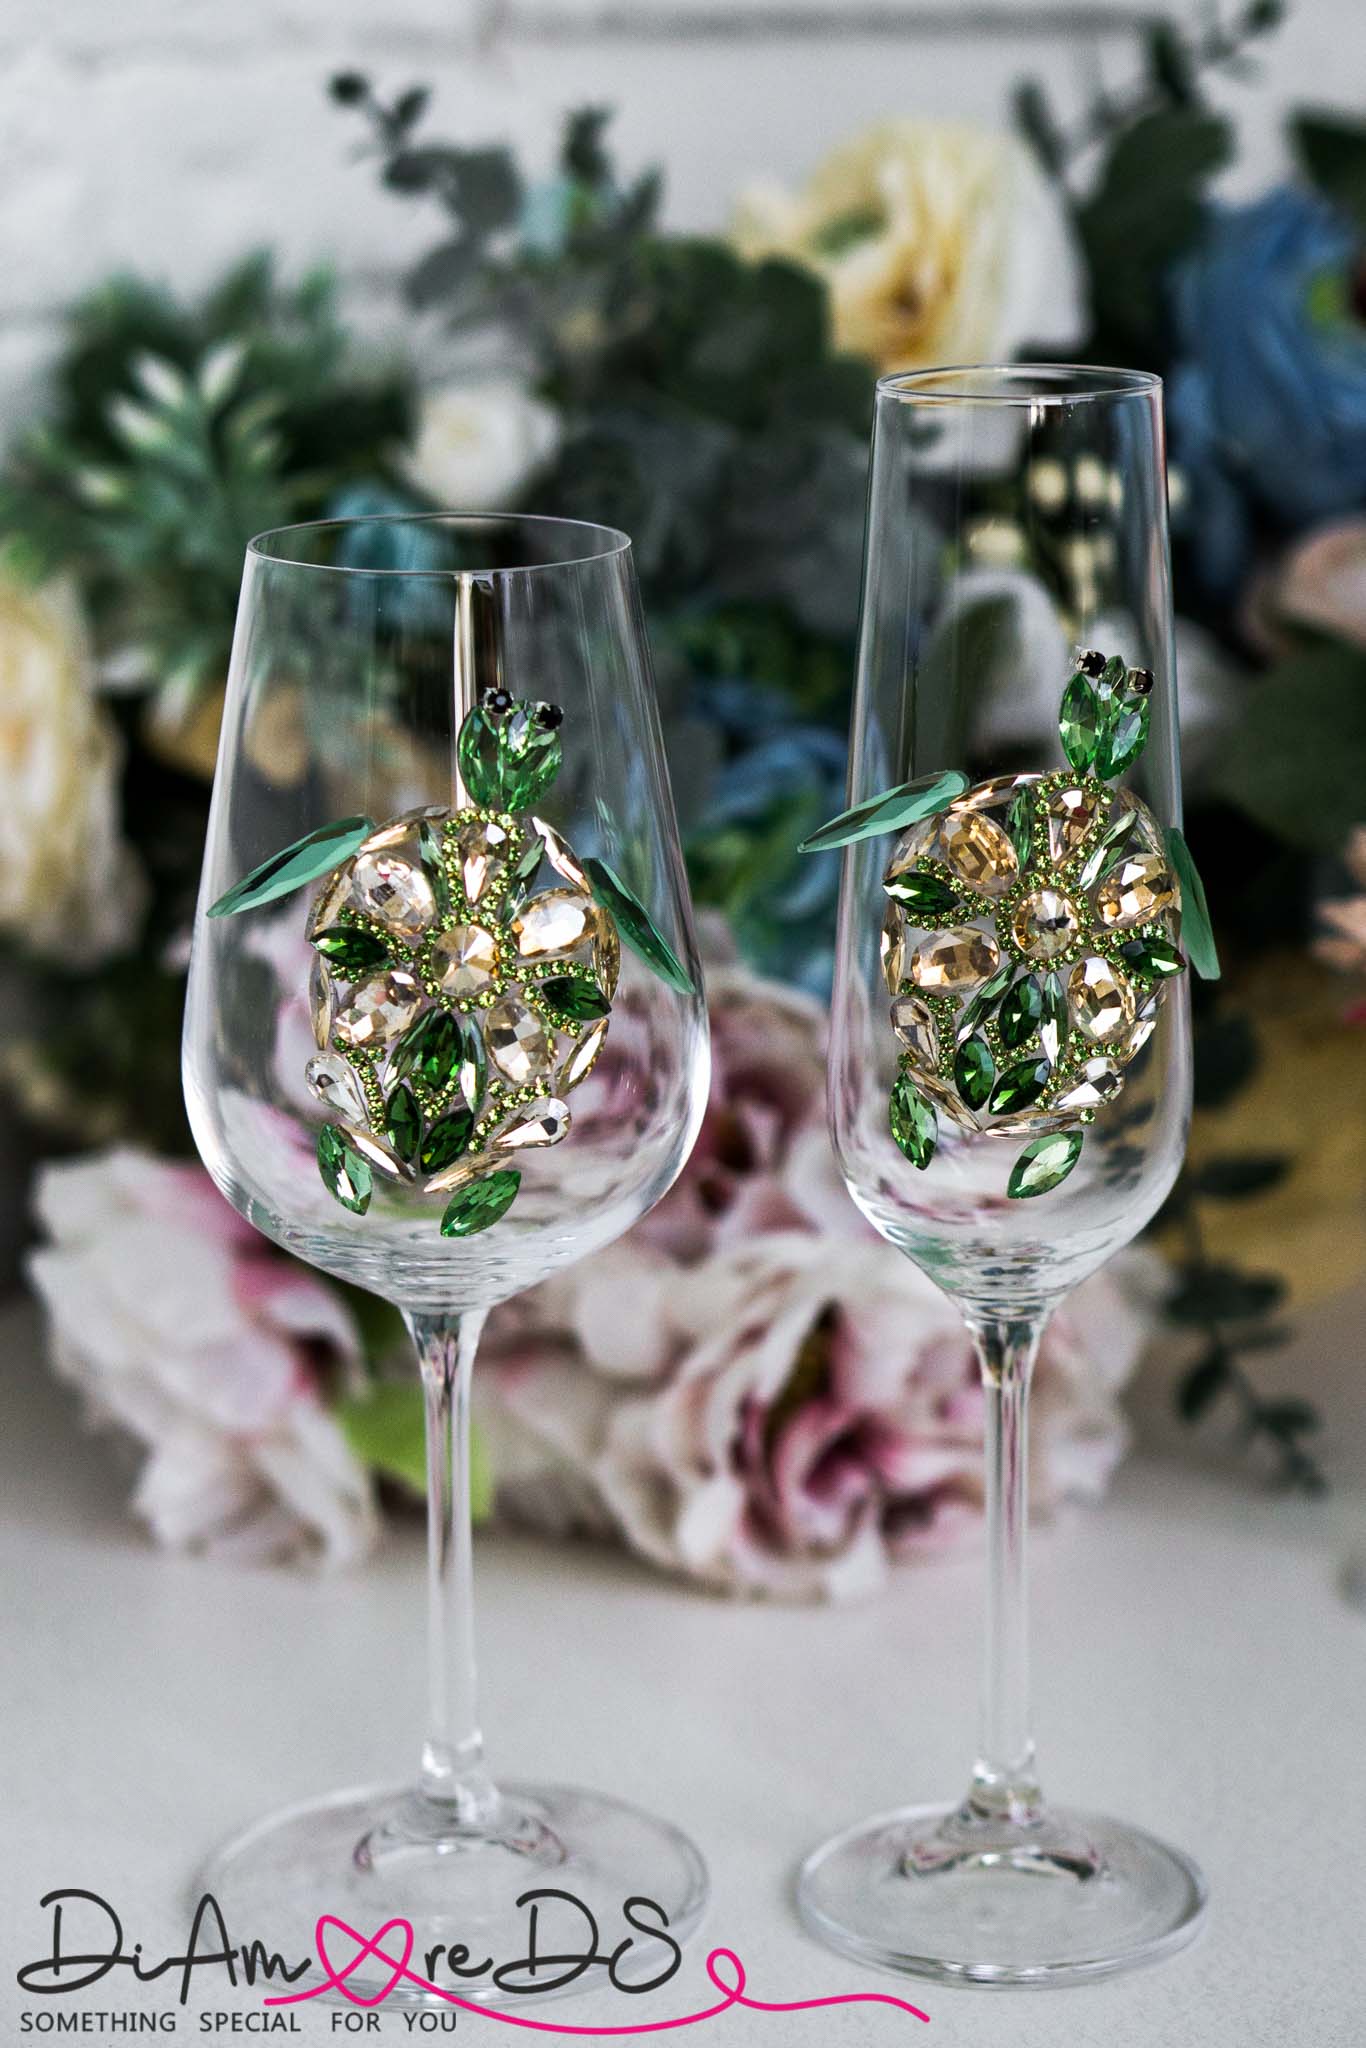 Elegant champagne flute with a sea turtle design, featuring green crystals and personalized engraving option."